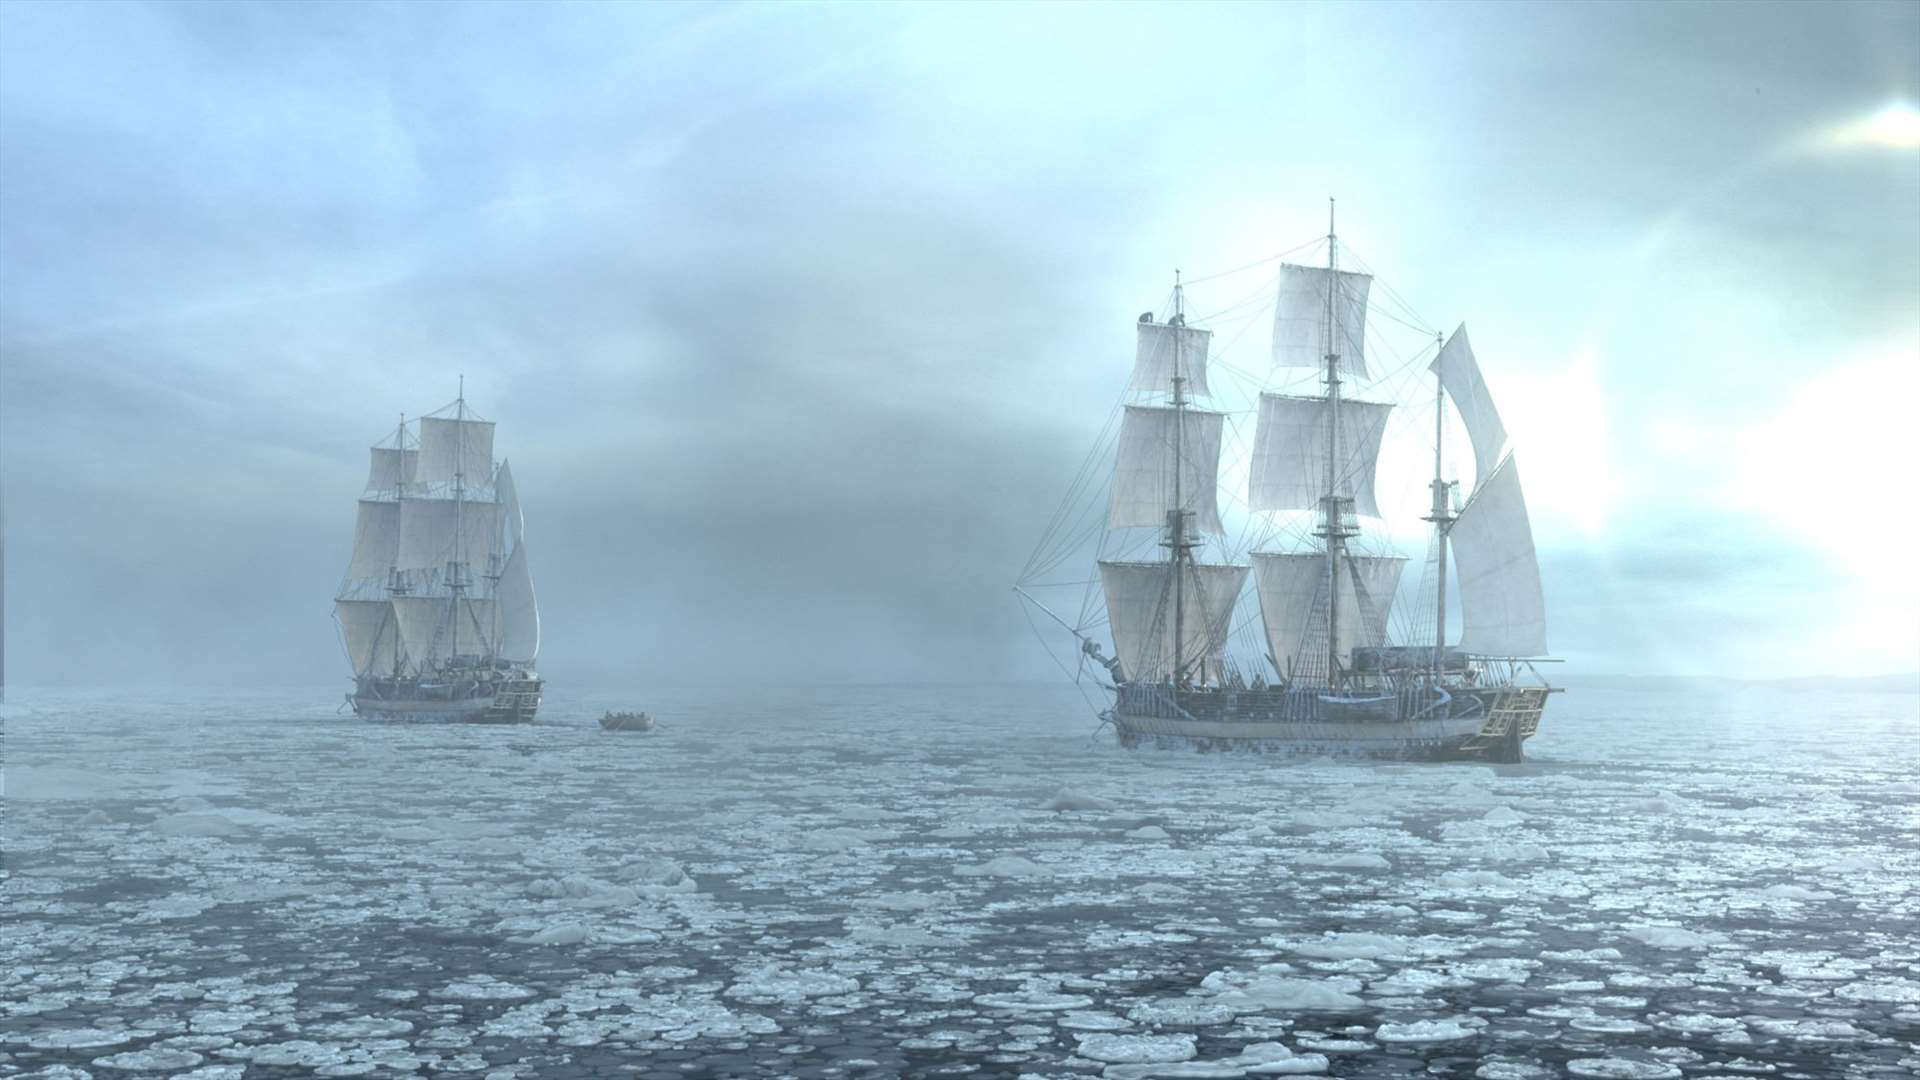 The journey of the Erebus and the Terror on the Ross expedition is set to be replicated in miniature.